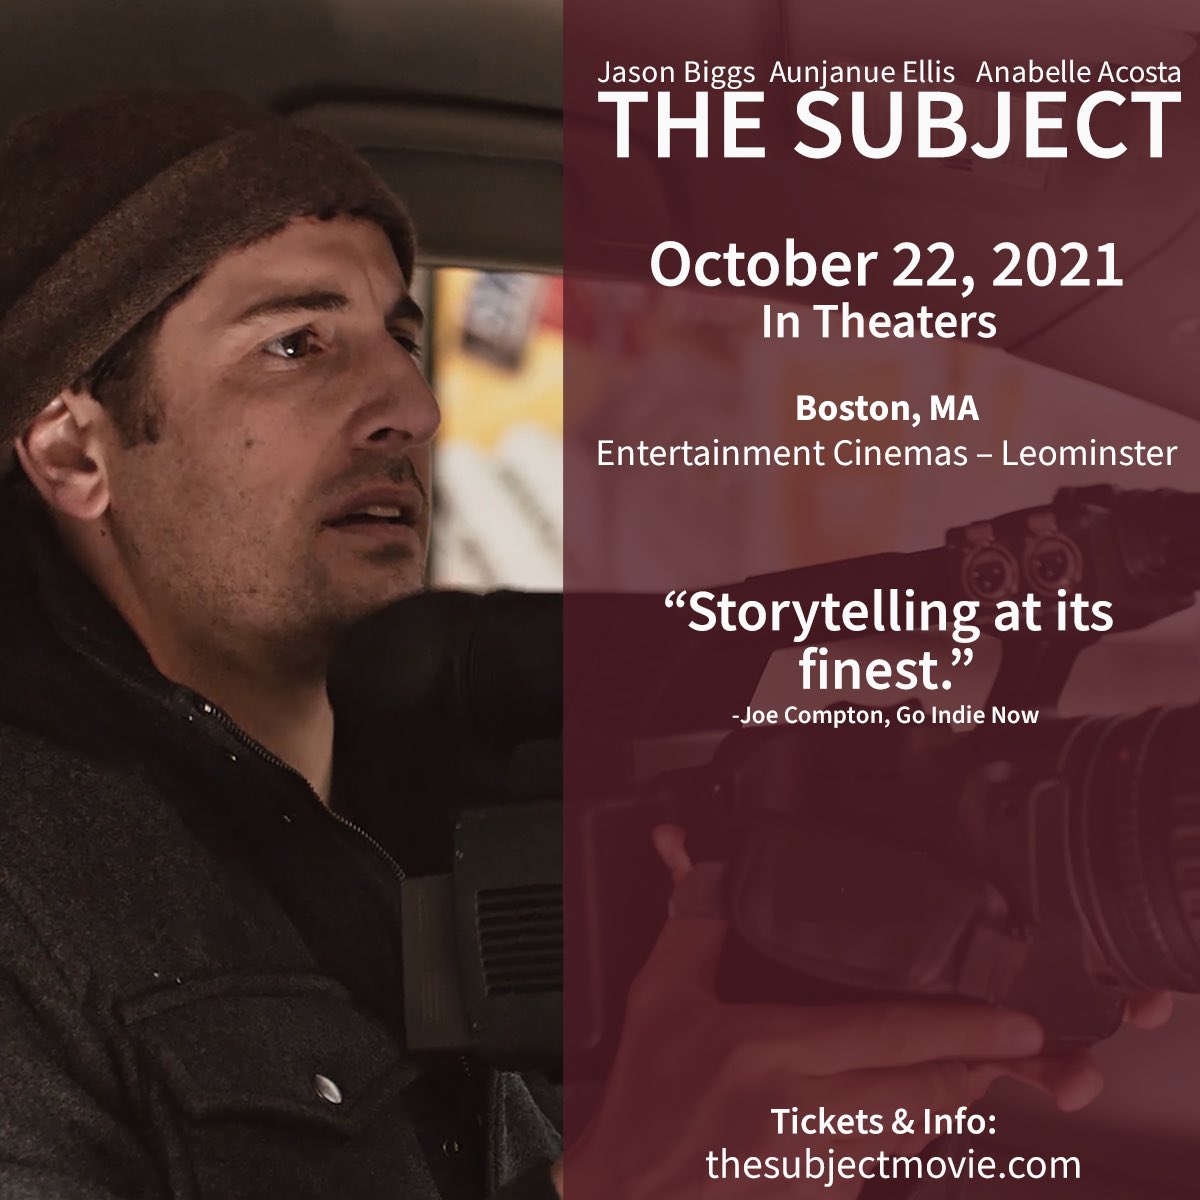 The Subject starring Jason Biggs and Aunjanue Ellis, comes out in theaters and on demand October 22nd. For details, visit thesubjectmovie.com Reserve your tickets today entertainmentcinemas.com/locations/leom… #thesubjectmovie #morethanamovie @lanieprochaine @thesubjectfilm